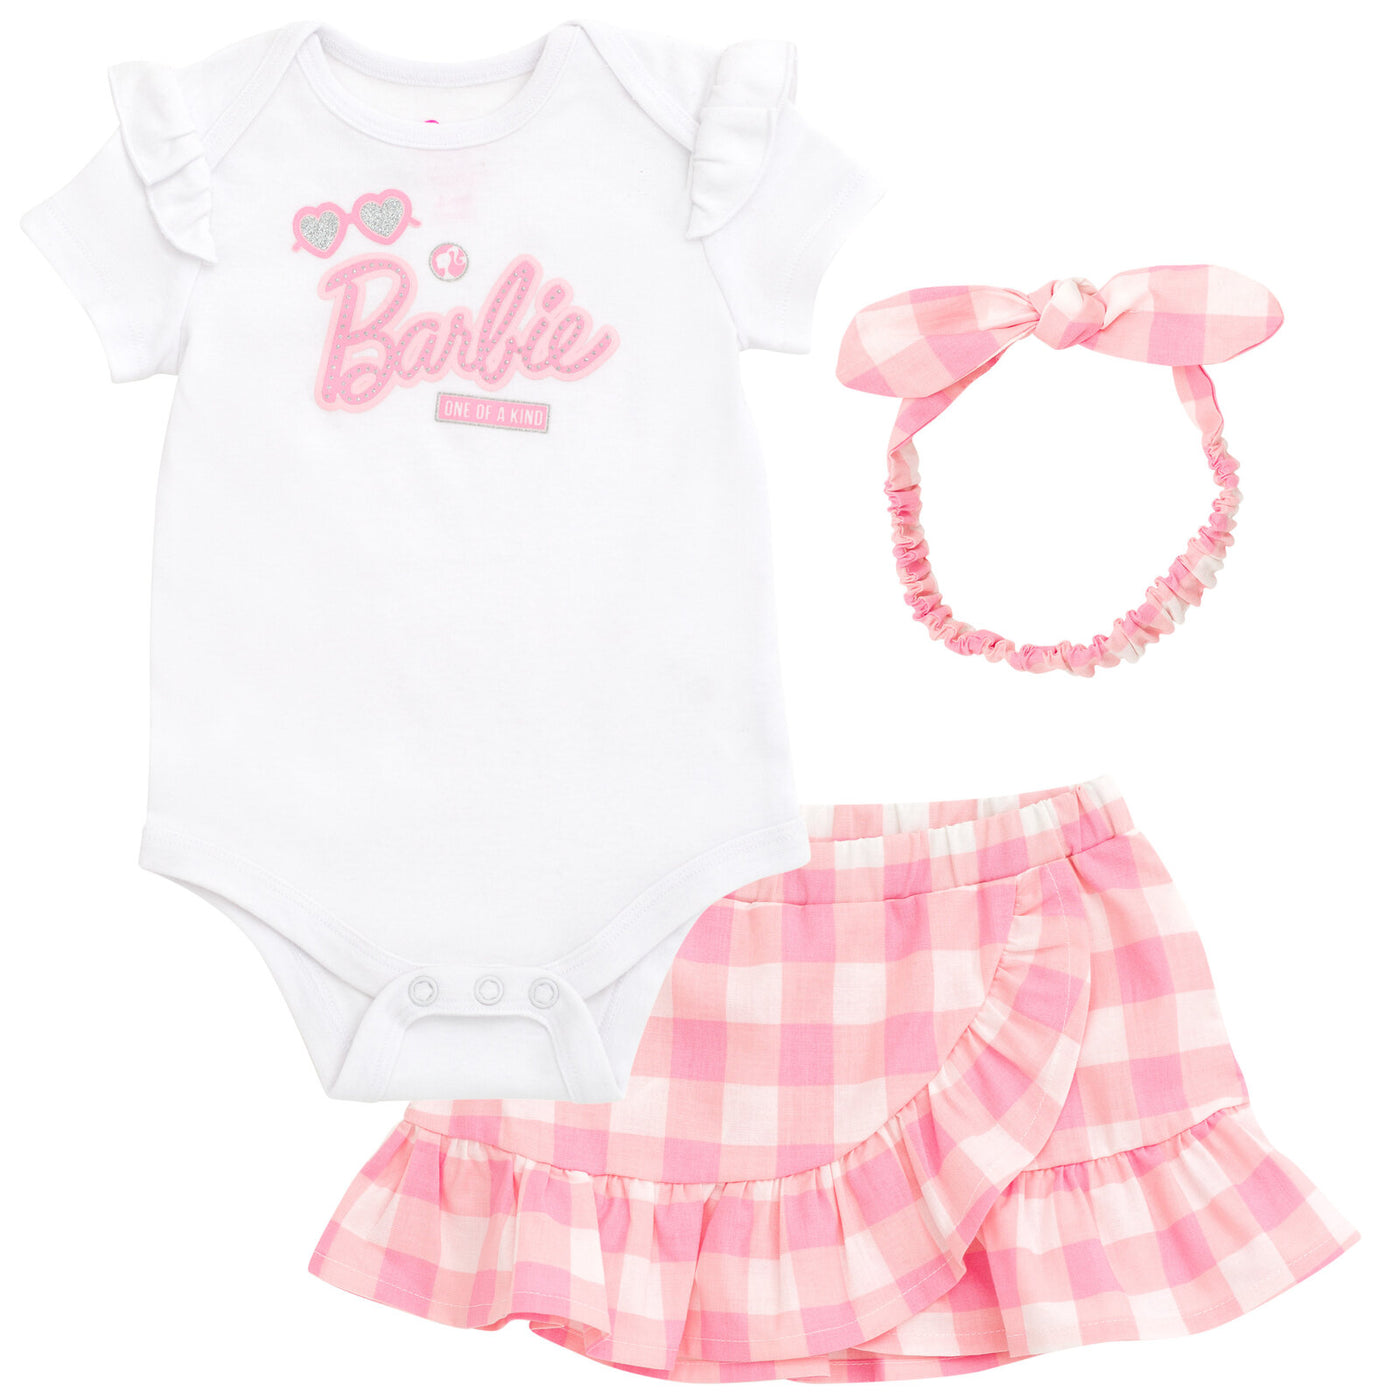 Barbie Baby Girls Bodysuit Ruffle Skirt and Bow Headband 3 Piece Outfit Set Newborn to Toddler